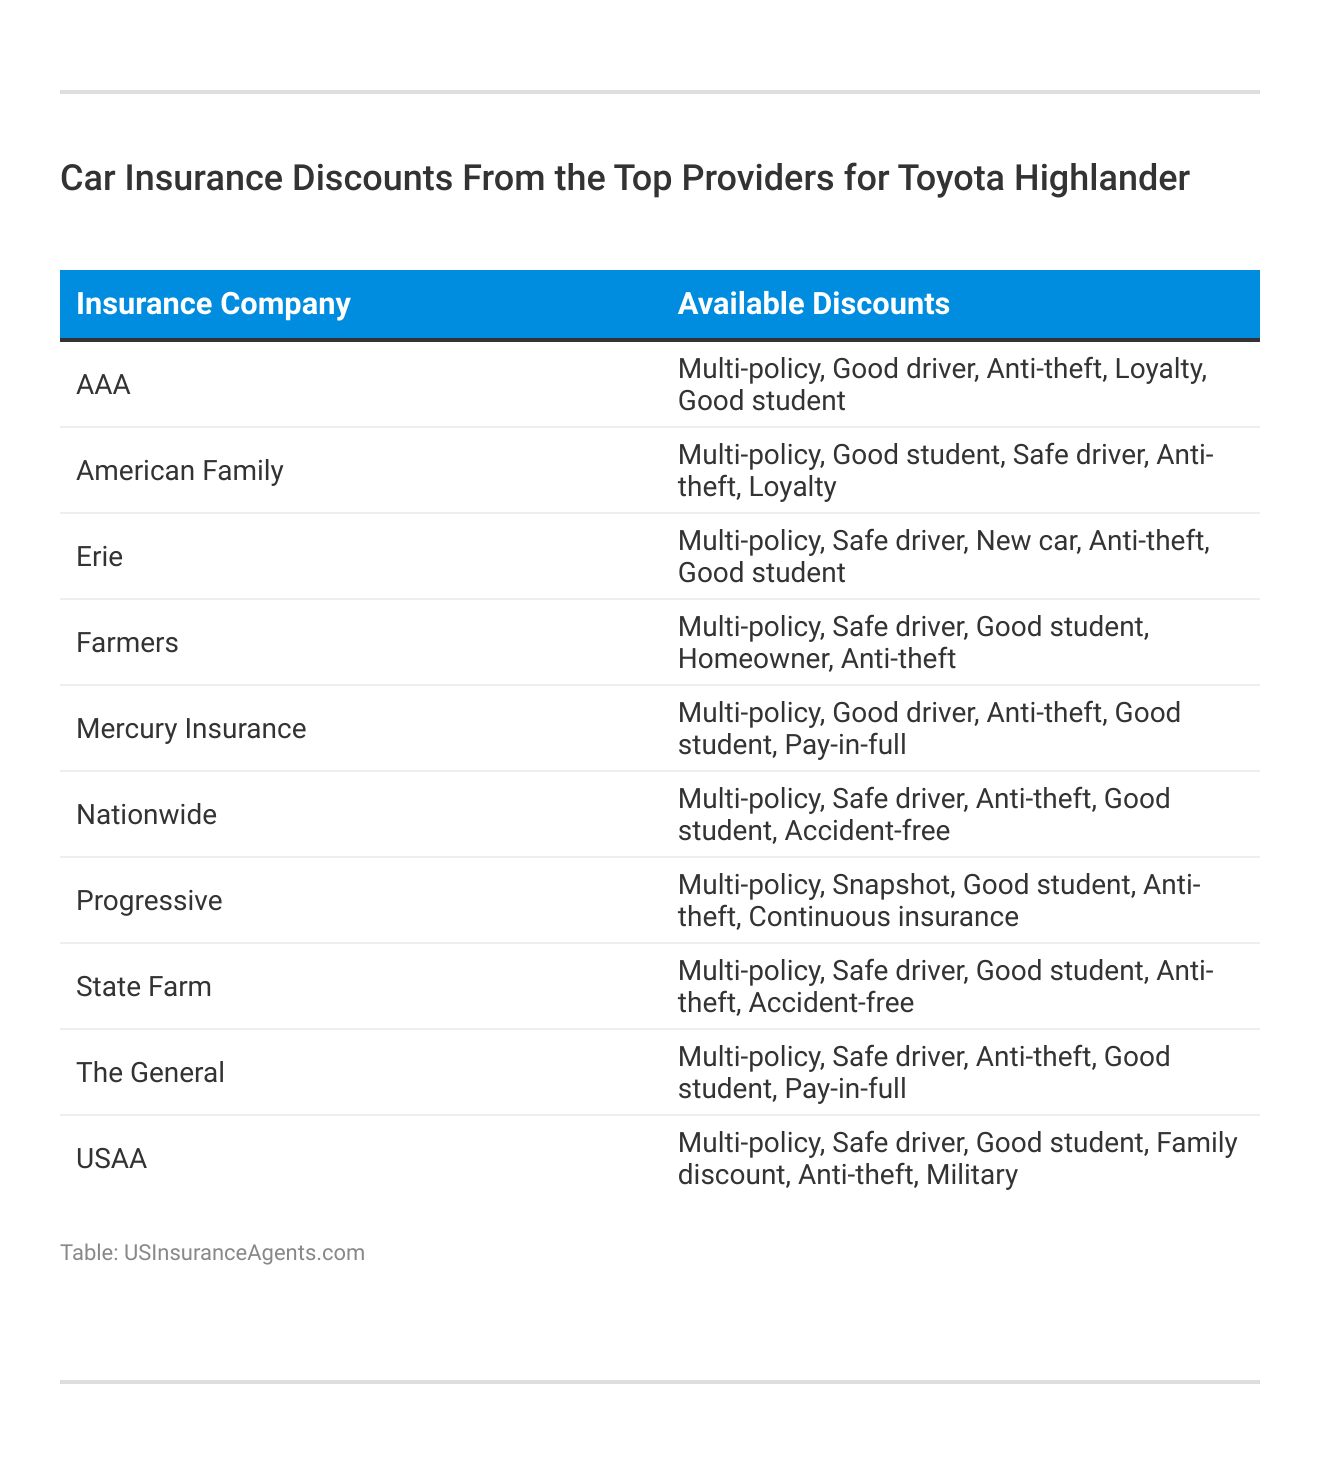 <h3>Car Insurance Discounts From the Top Providers for Toyota Highlander</h3>